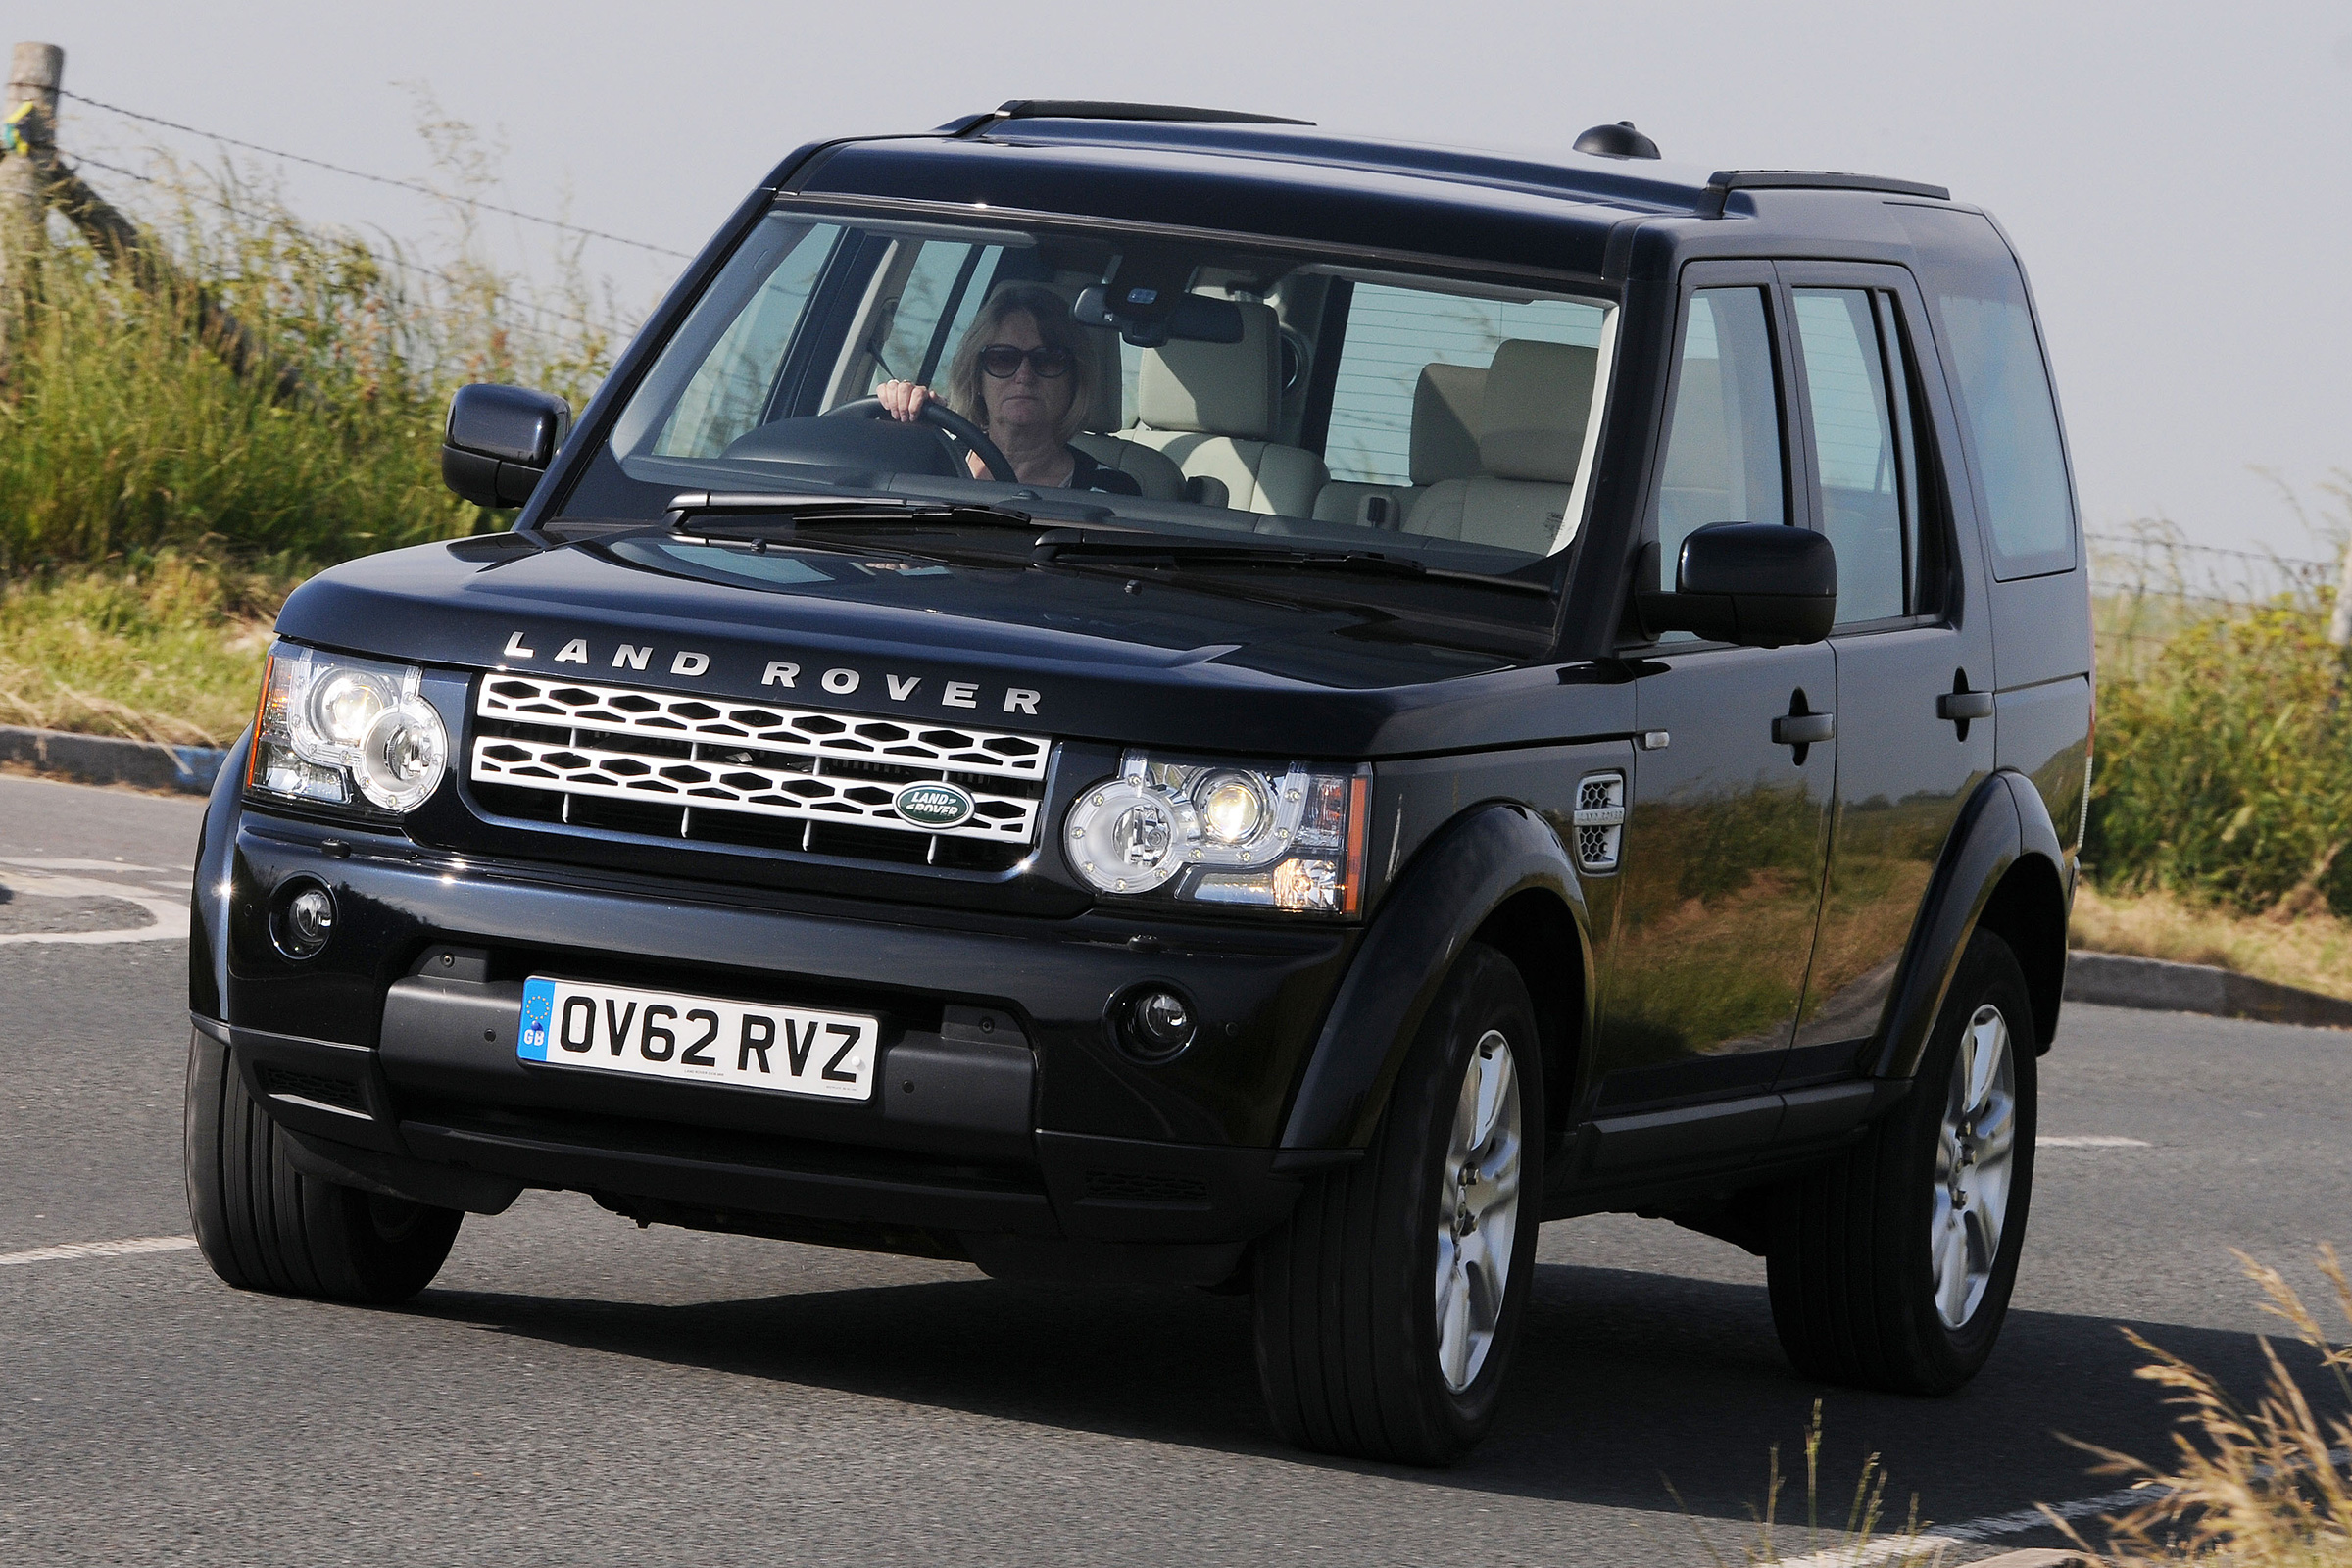 Land Rover Discovery 4: £15k-£20k - Best cheap 4x4s | Auto Express